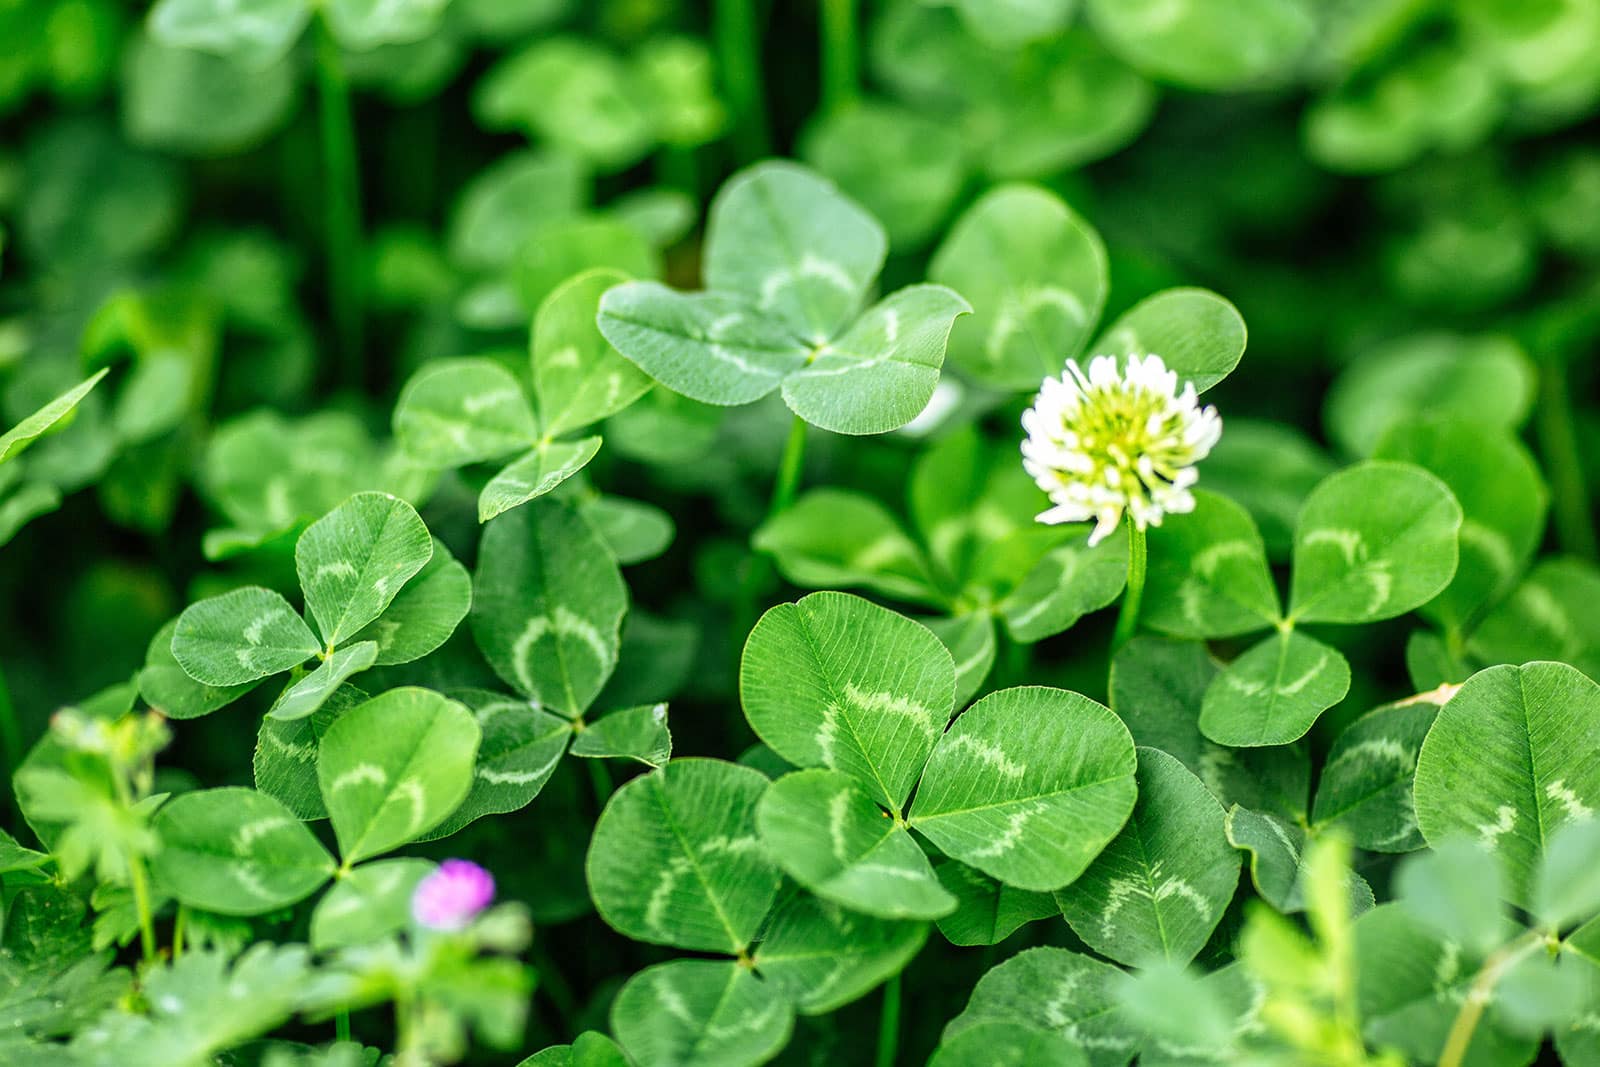 Close-up of clover with white flower